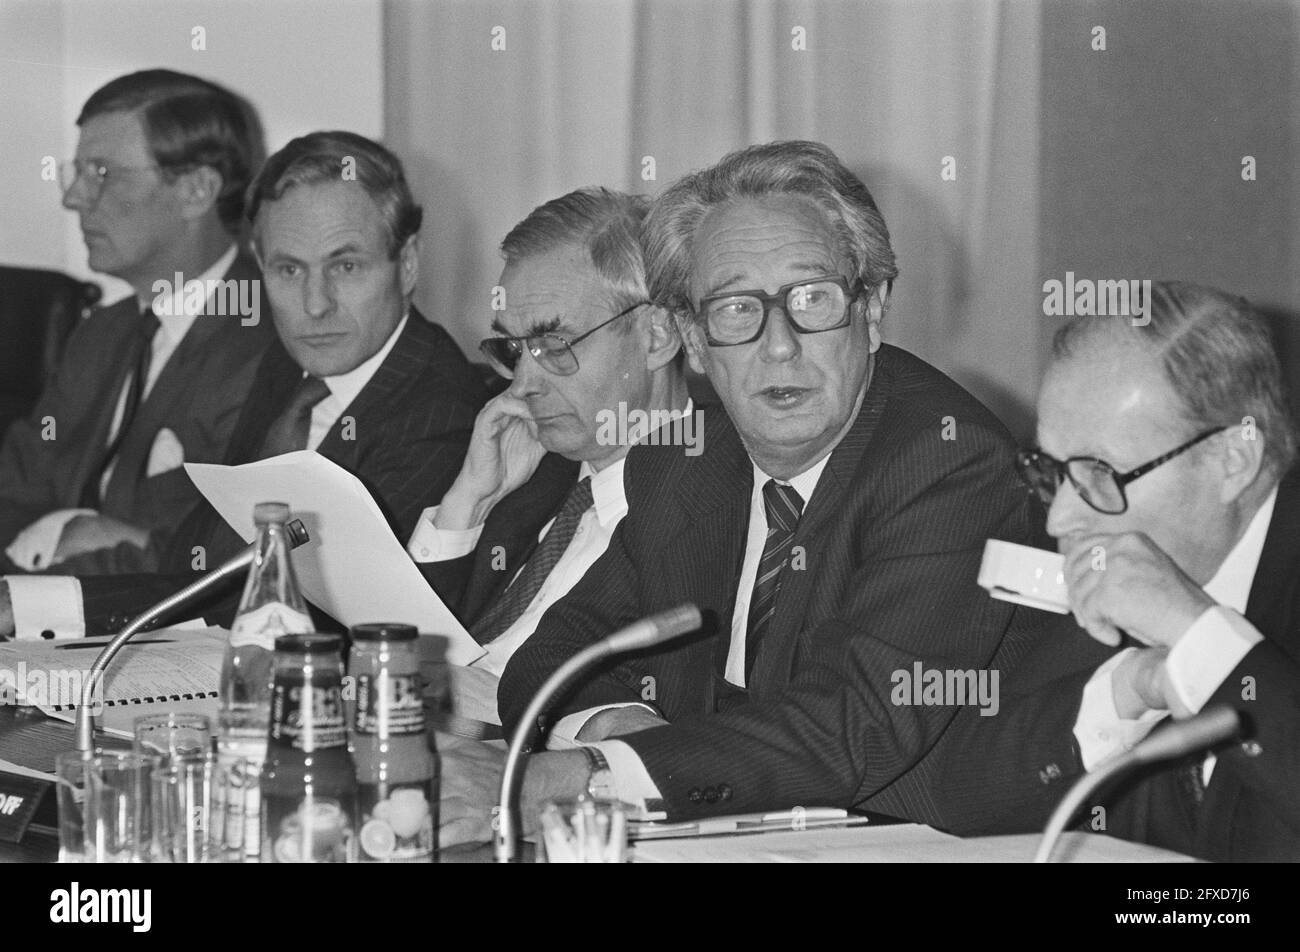 Presentation of annual figures of ABN bank, chairman of the executive board drs. R. Hazelhoff, assignment Financieel Dagblad, March 6, 1987, chairmen, The Netherlands, 20th century press agency photo, news to remember, documentary, historic photography 1945-1990, visual stories, human history of the Twentieth Century, capturing moments in time Stock Photo